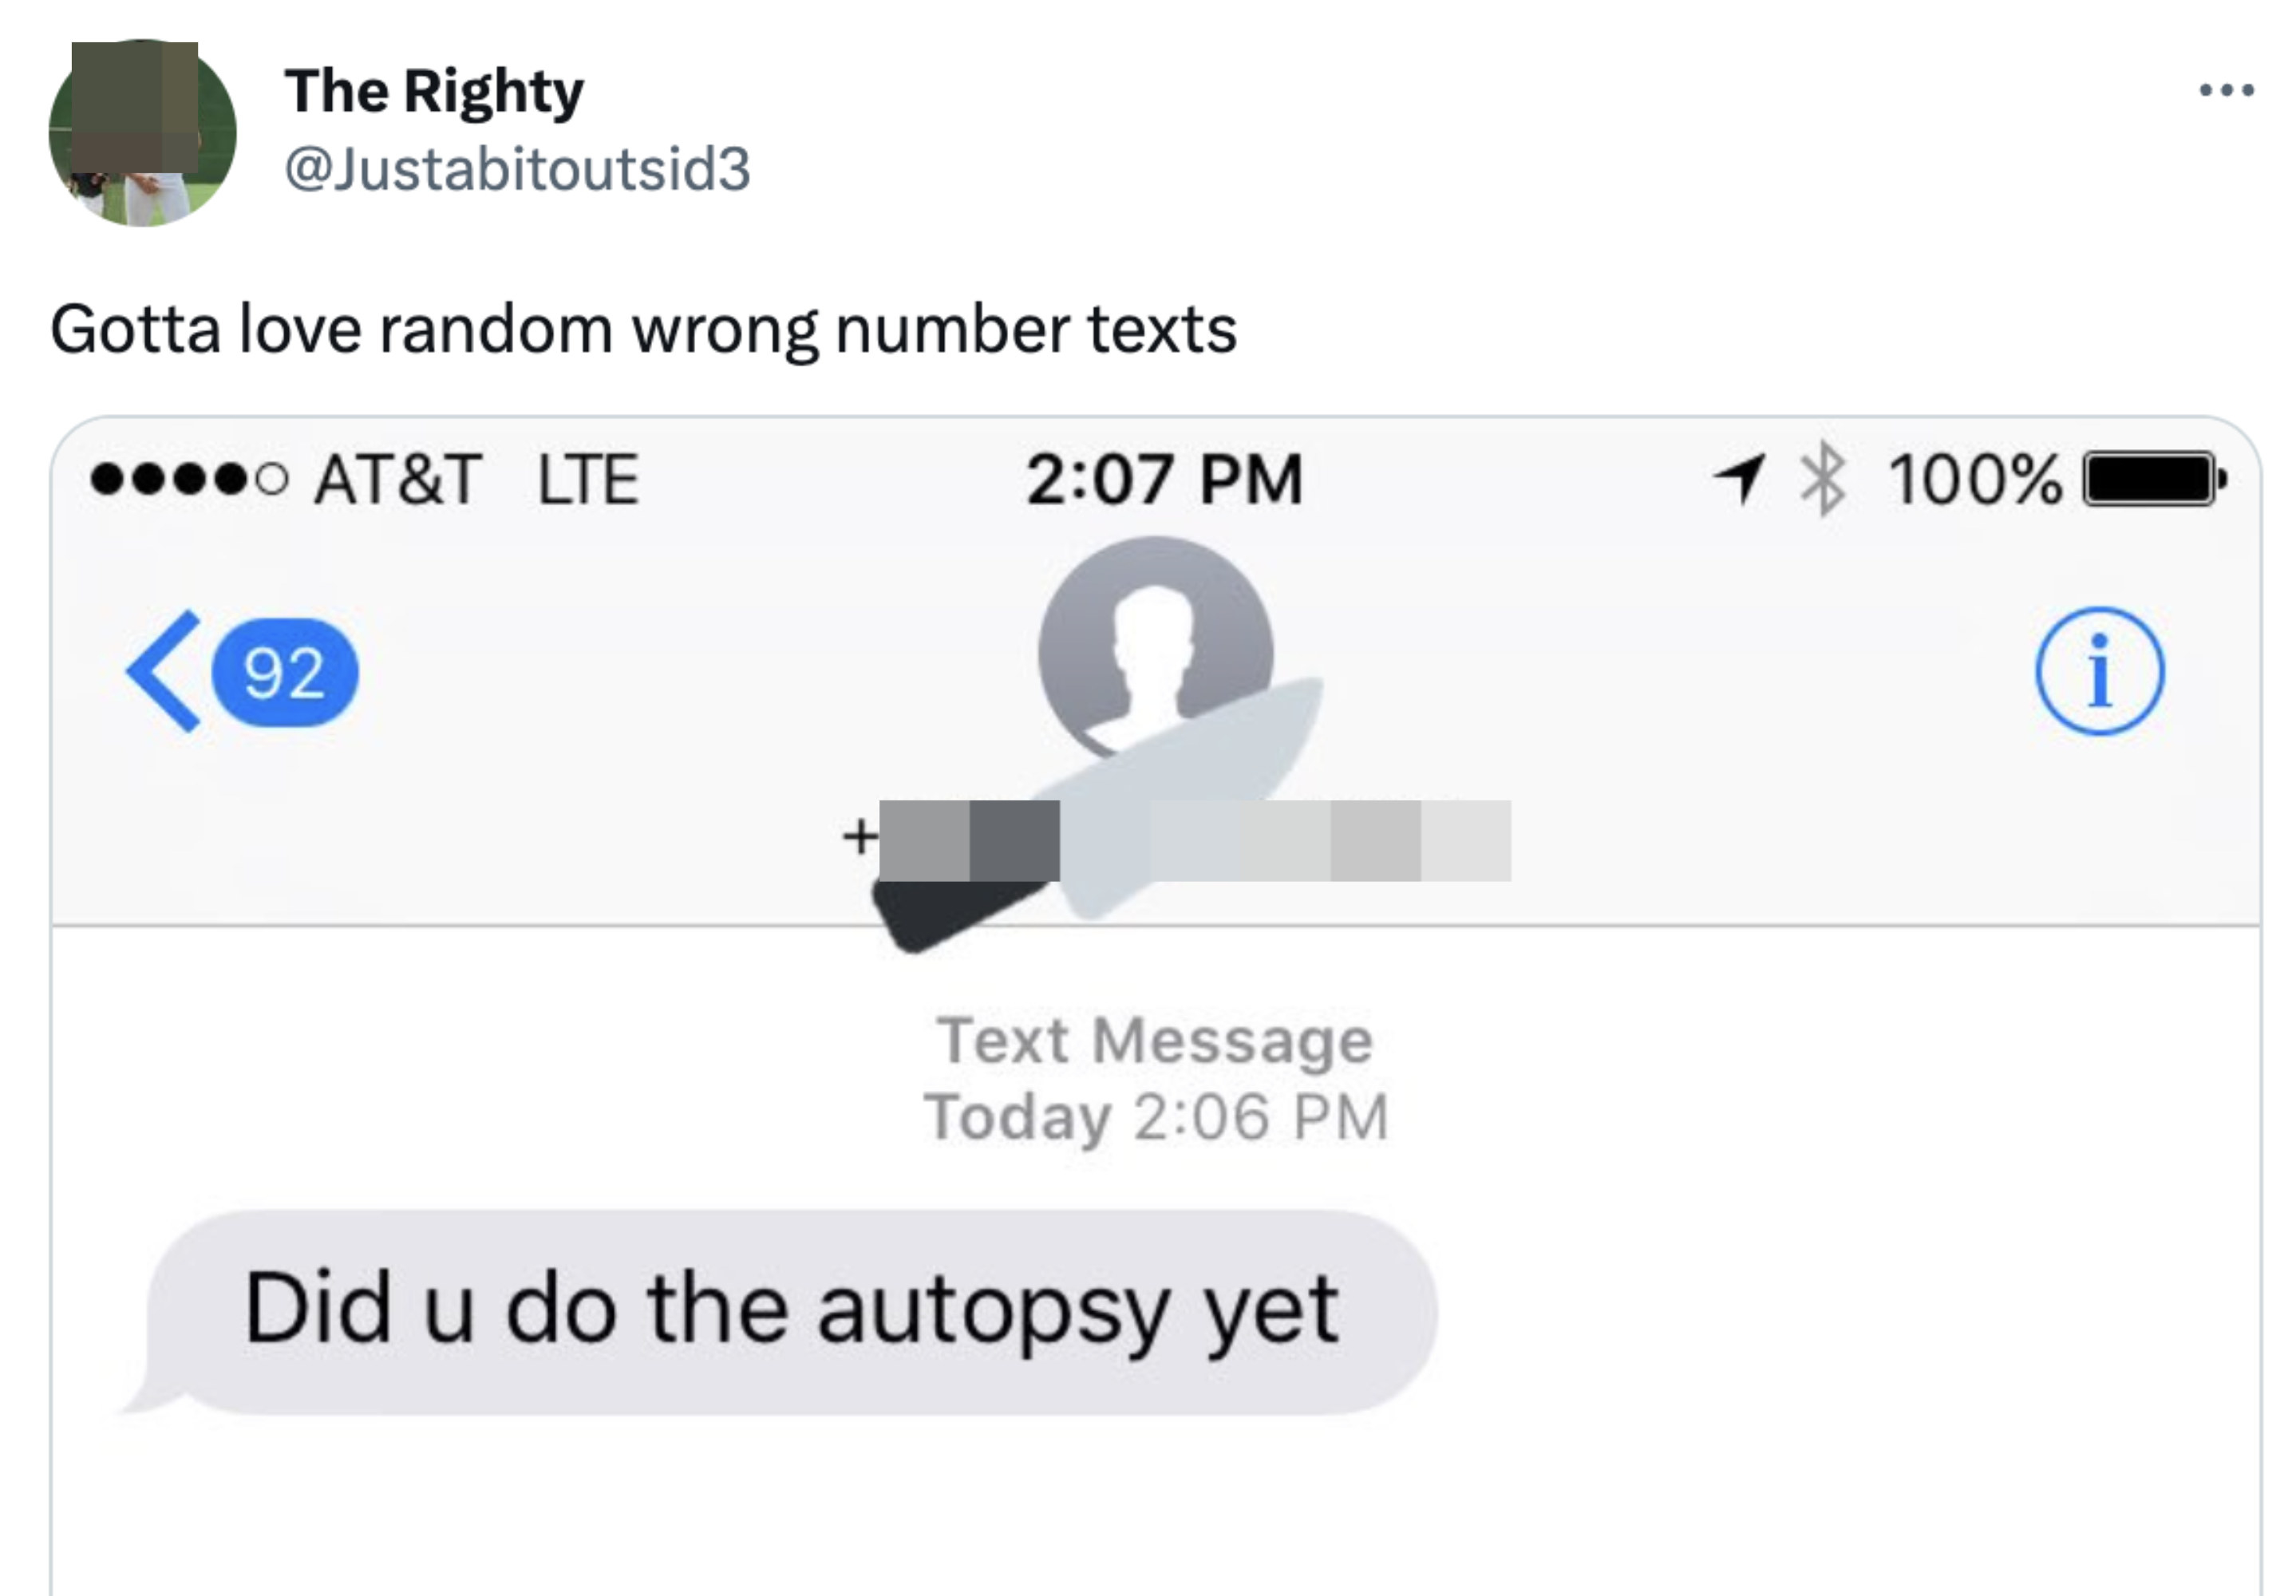 Wrong number text saying &quot;Did u do the autopsy yet&quot;